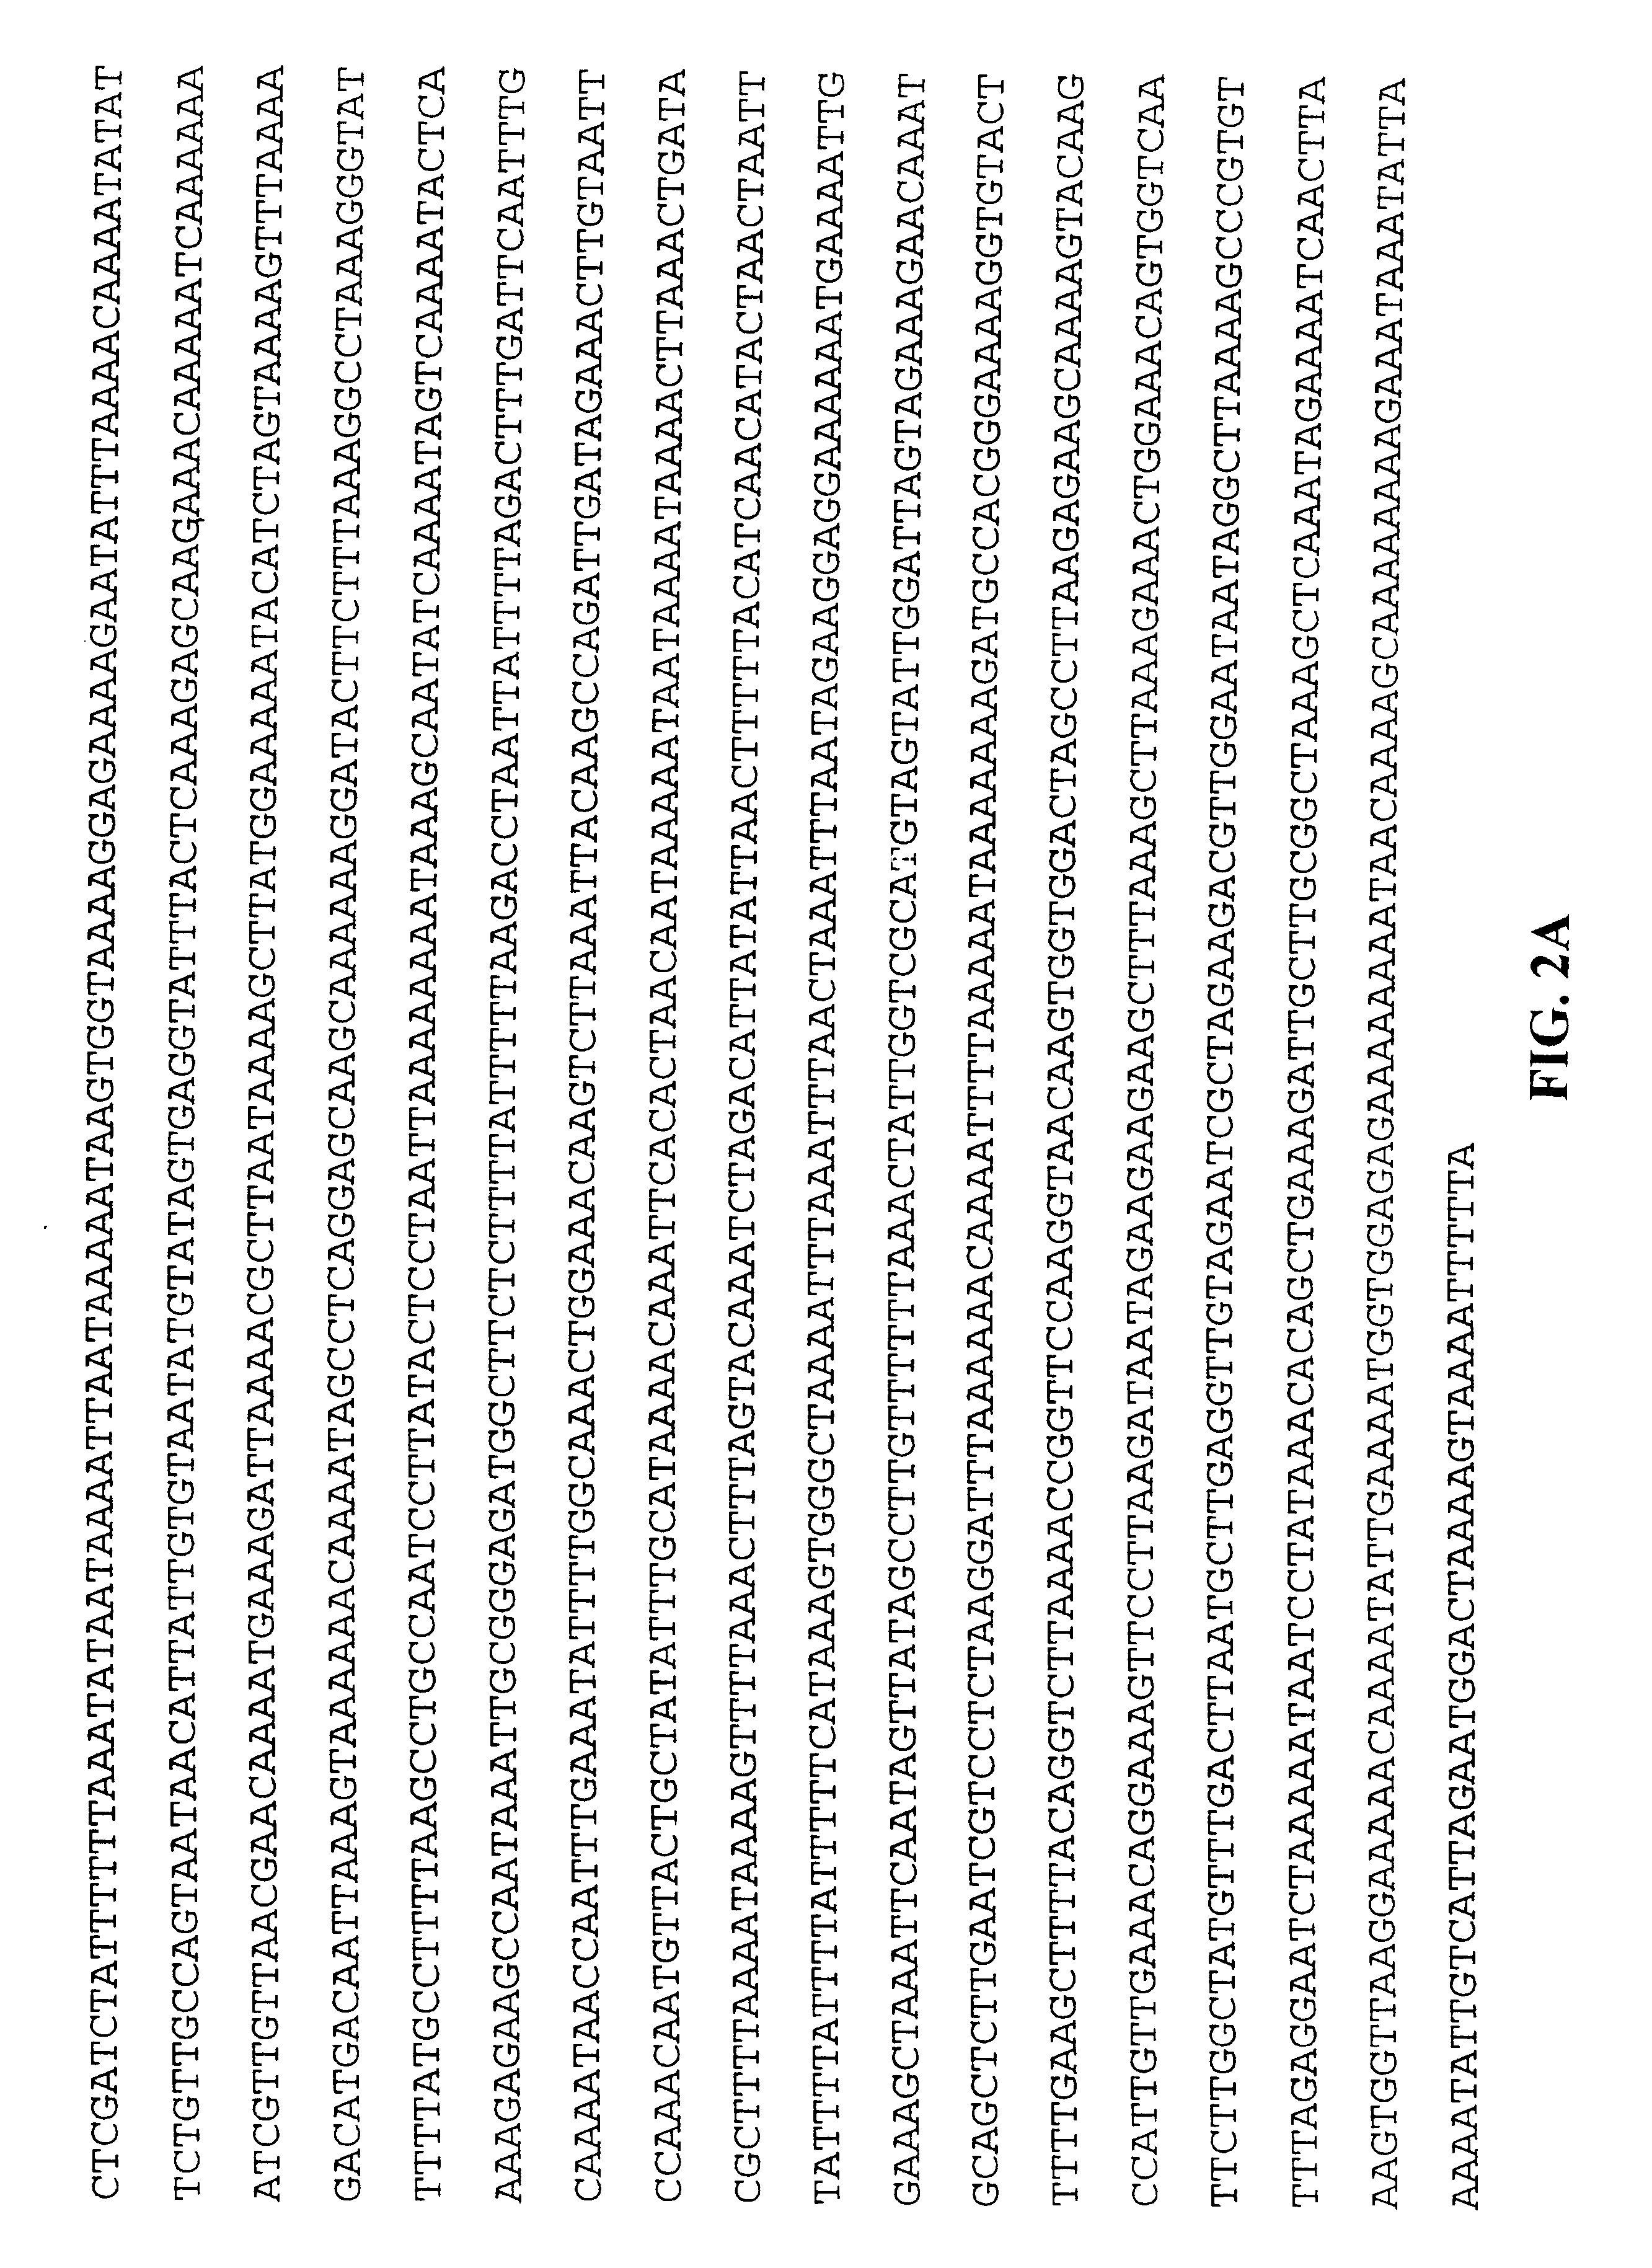 DbpA compositions and methods of use